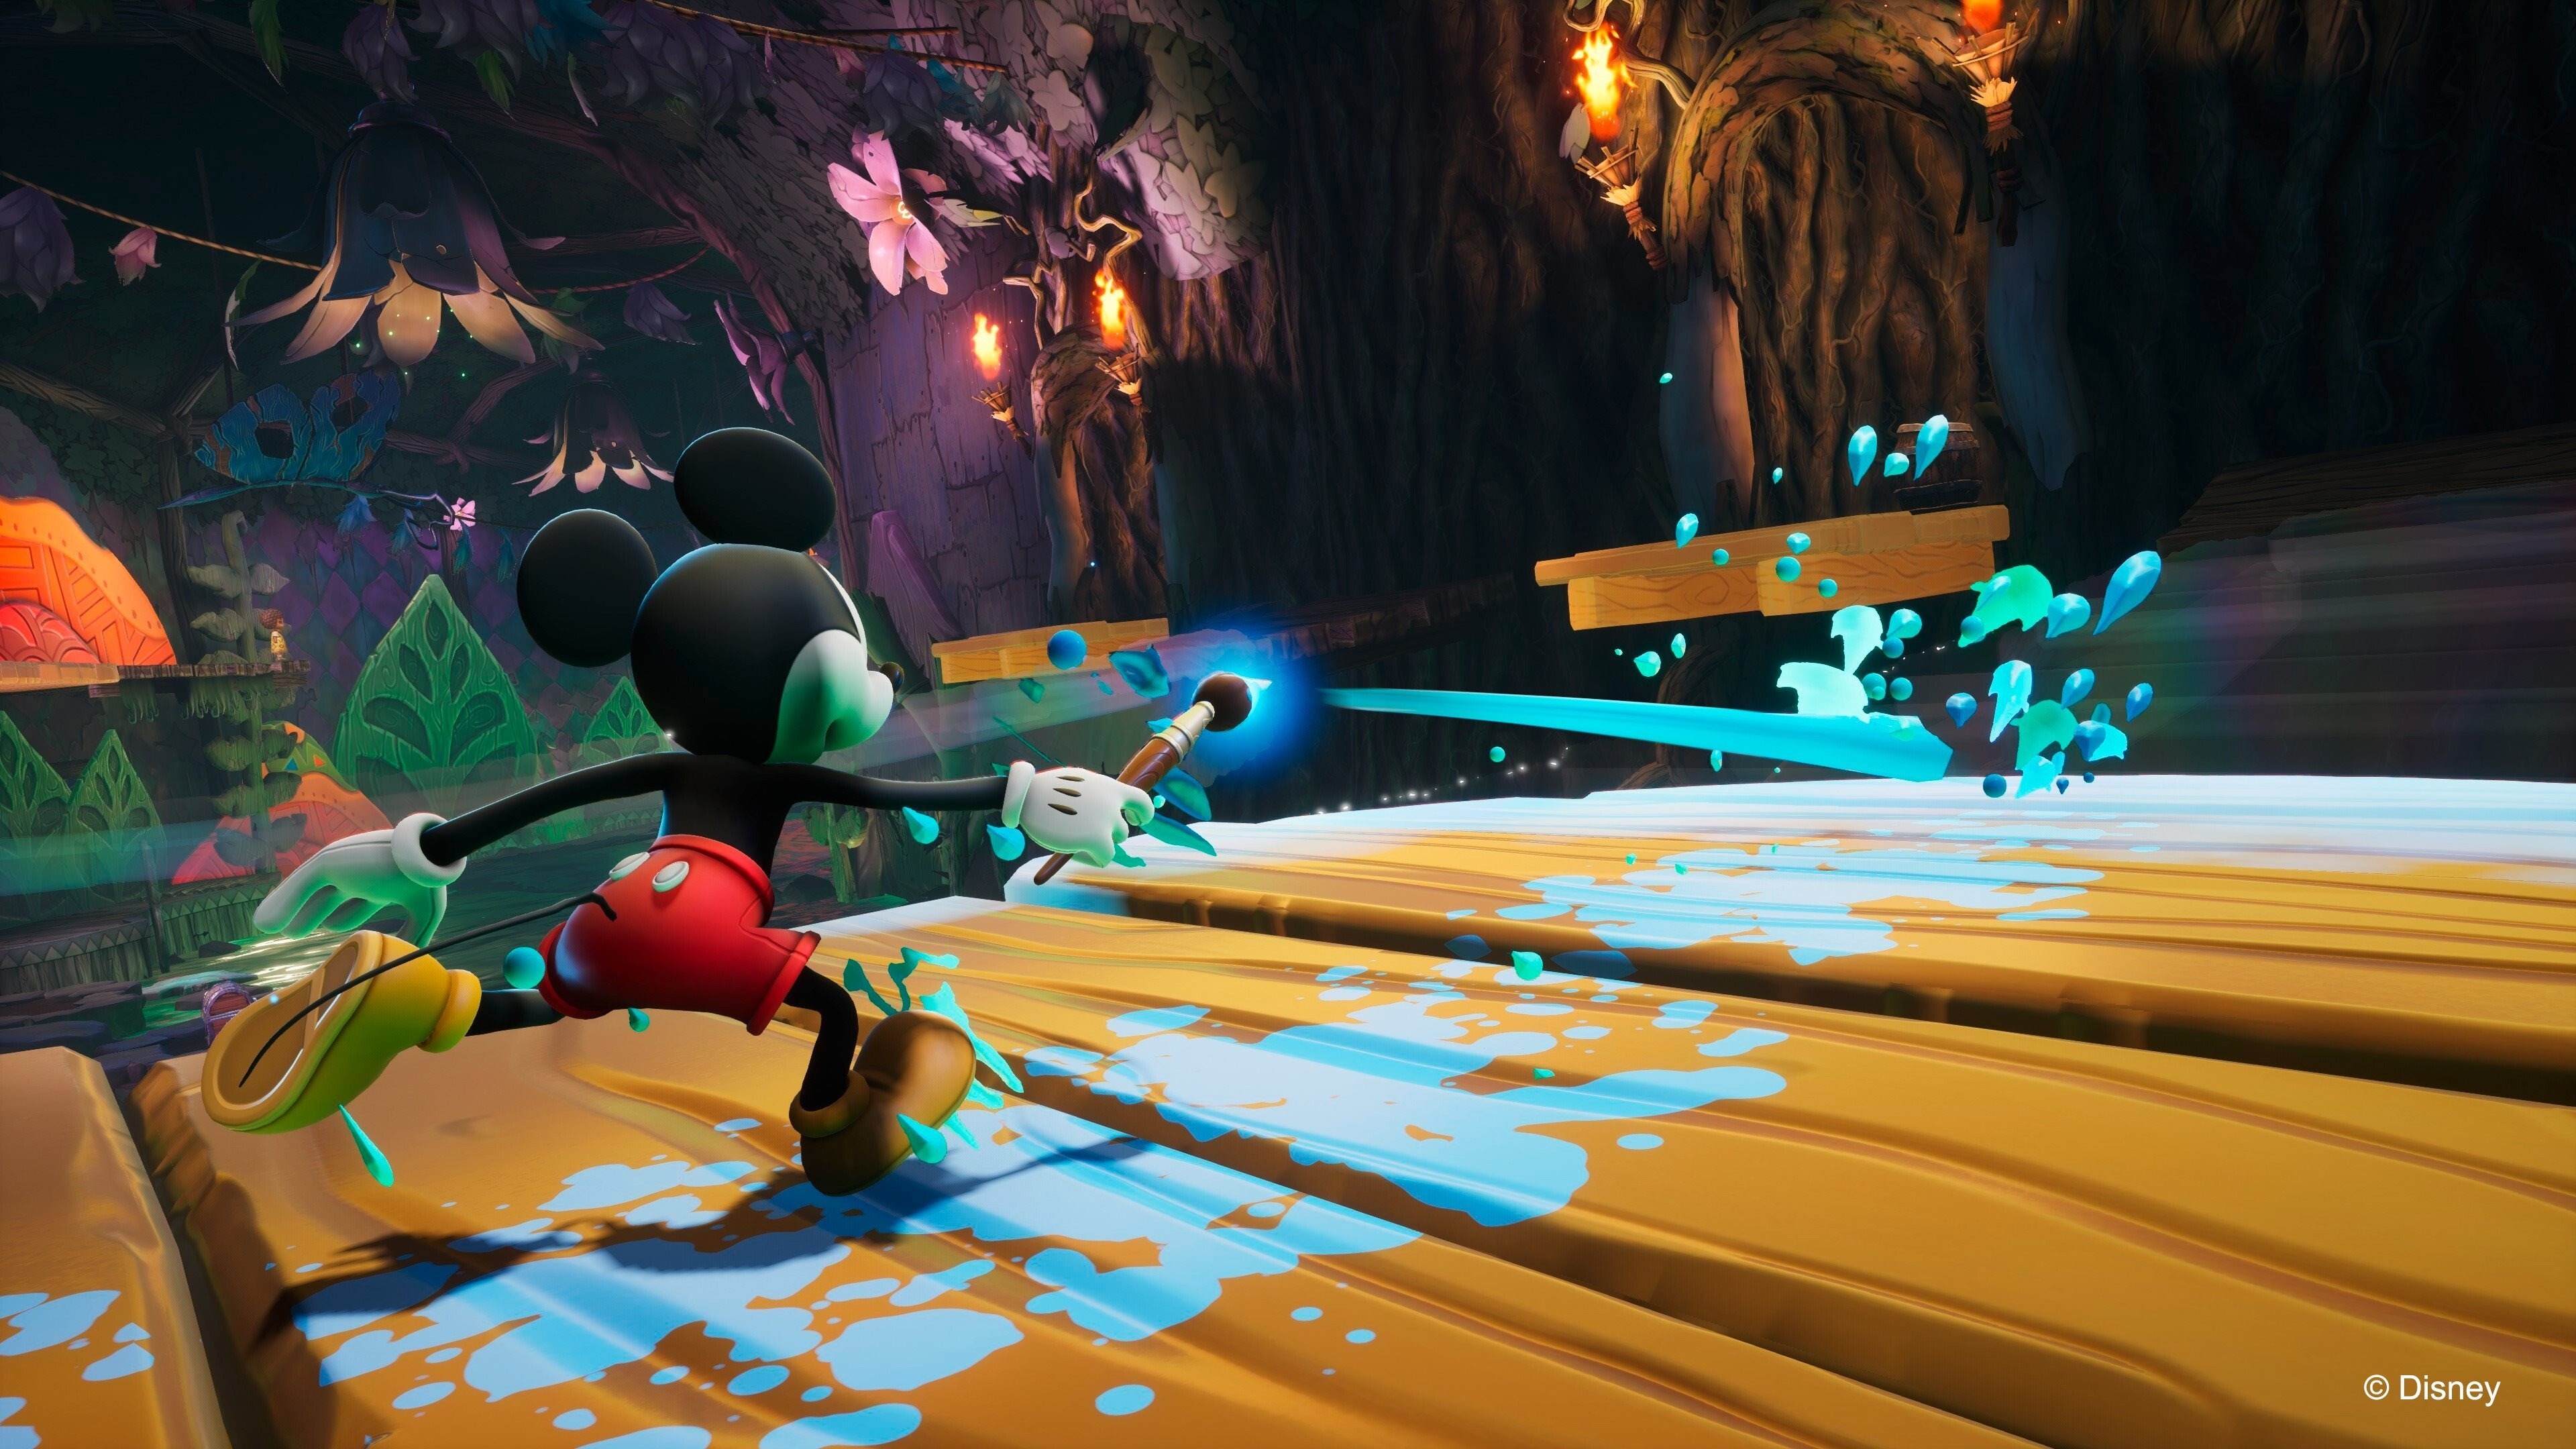 Disney Epic Mickey: Rebrushed Collector's Edition